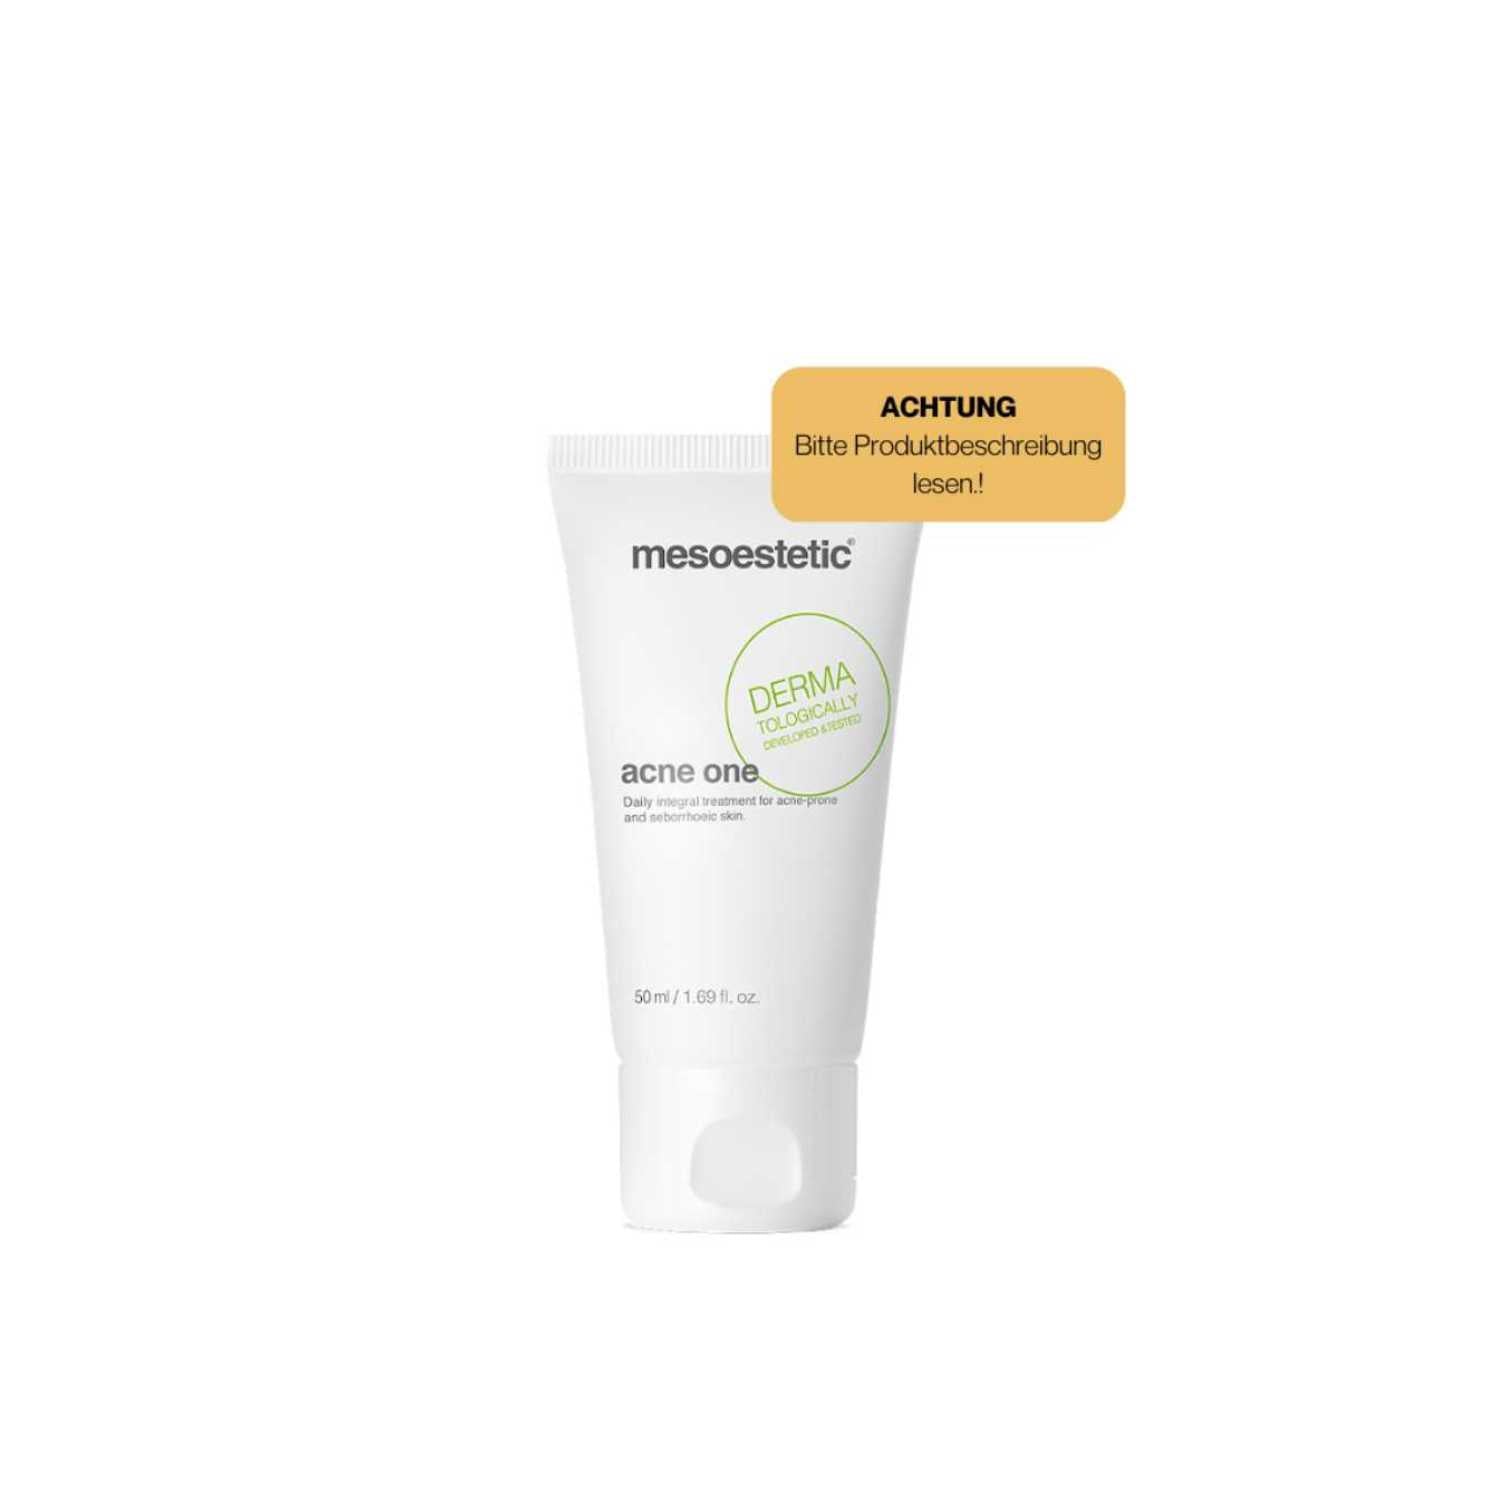 Mesoestetic®acne one